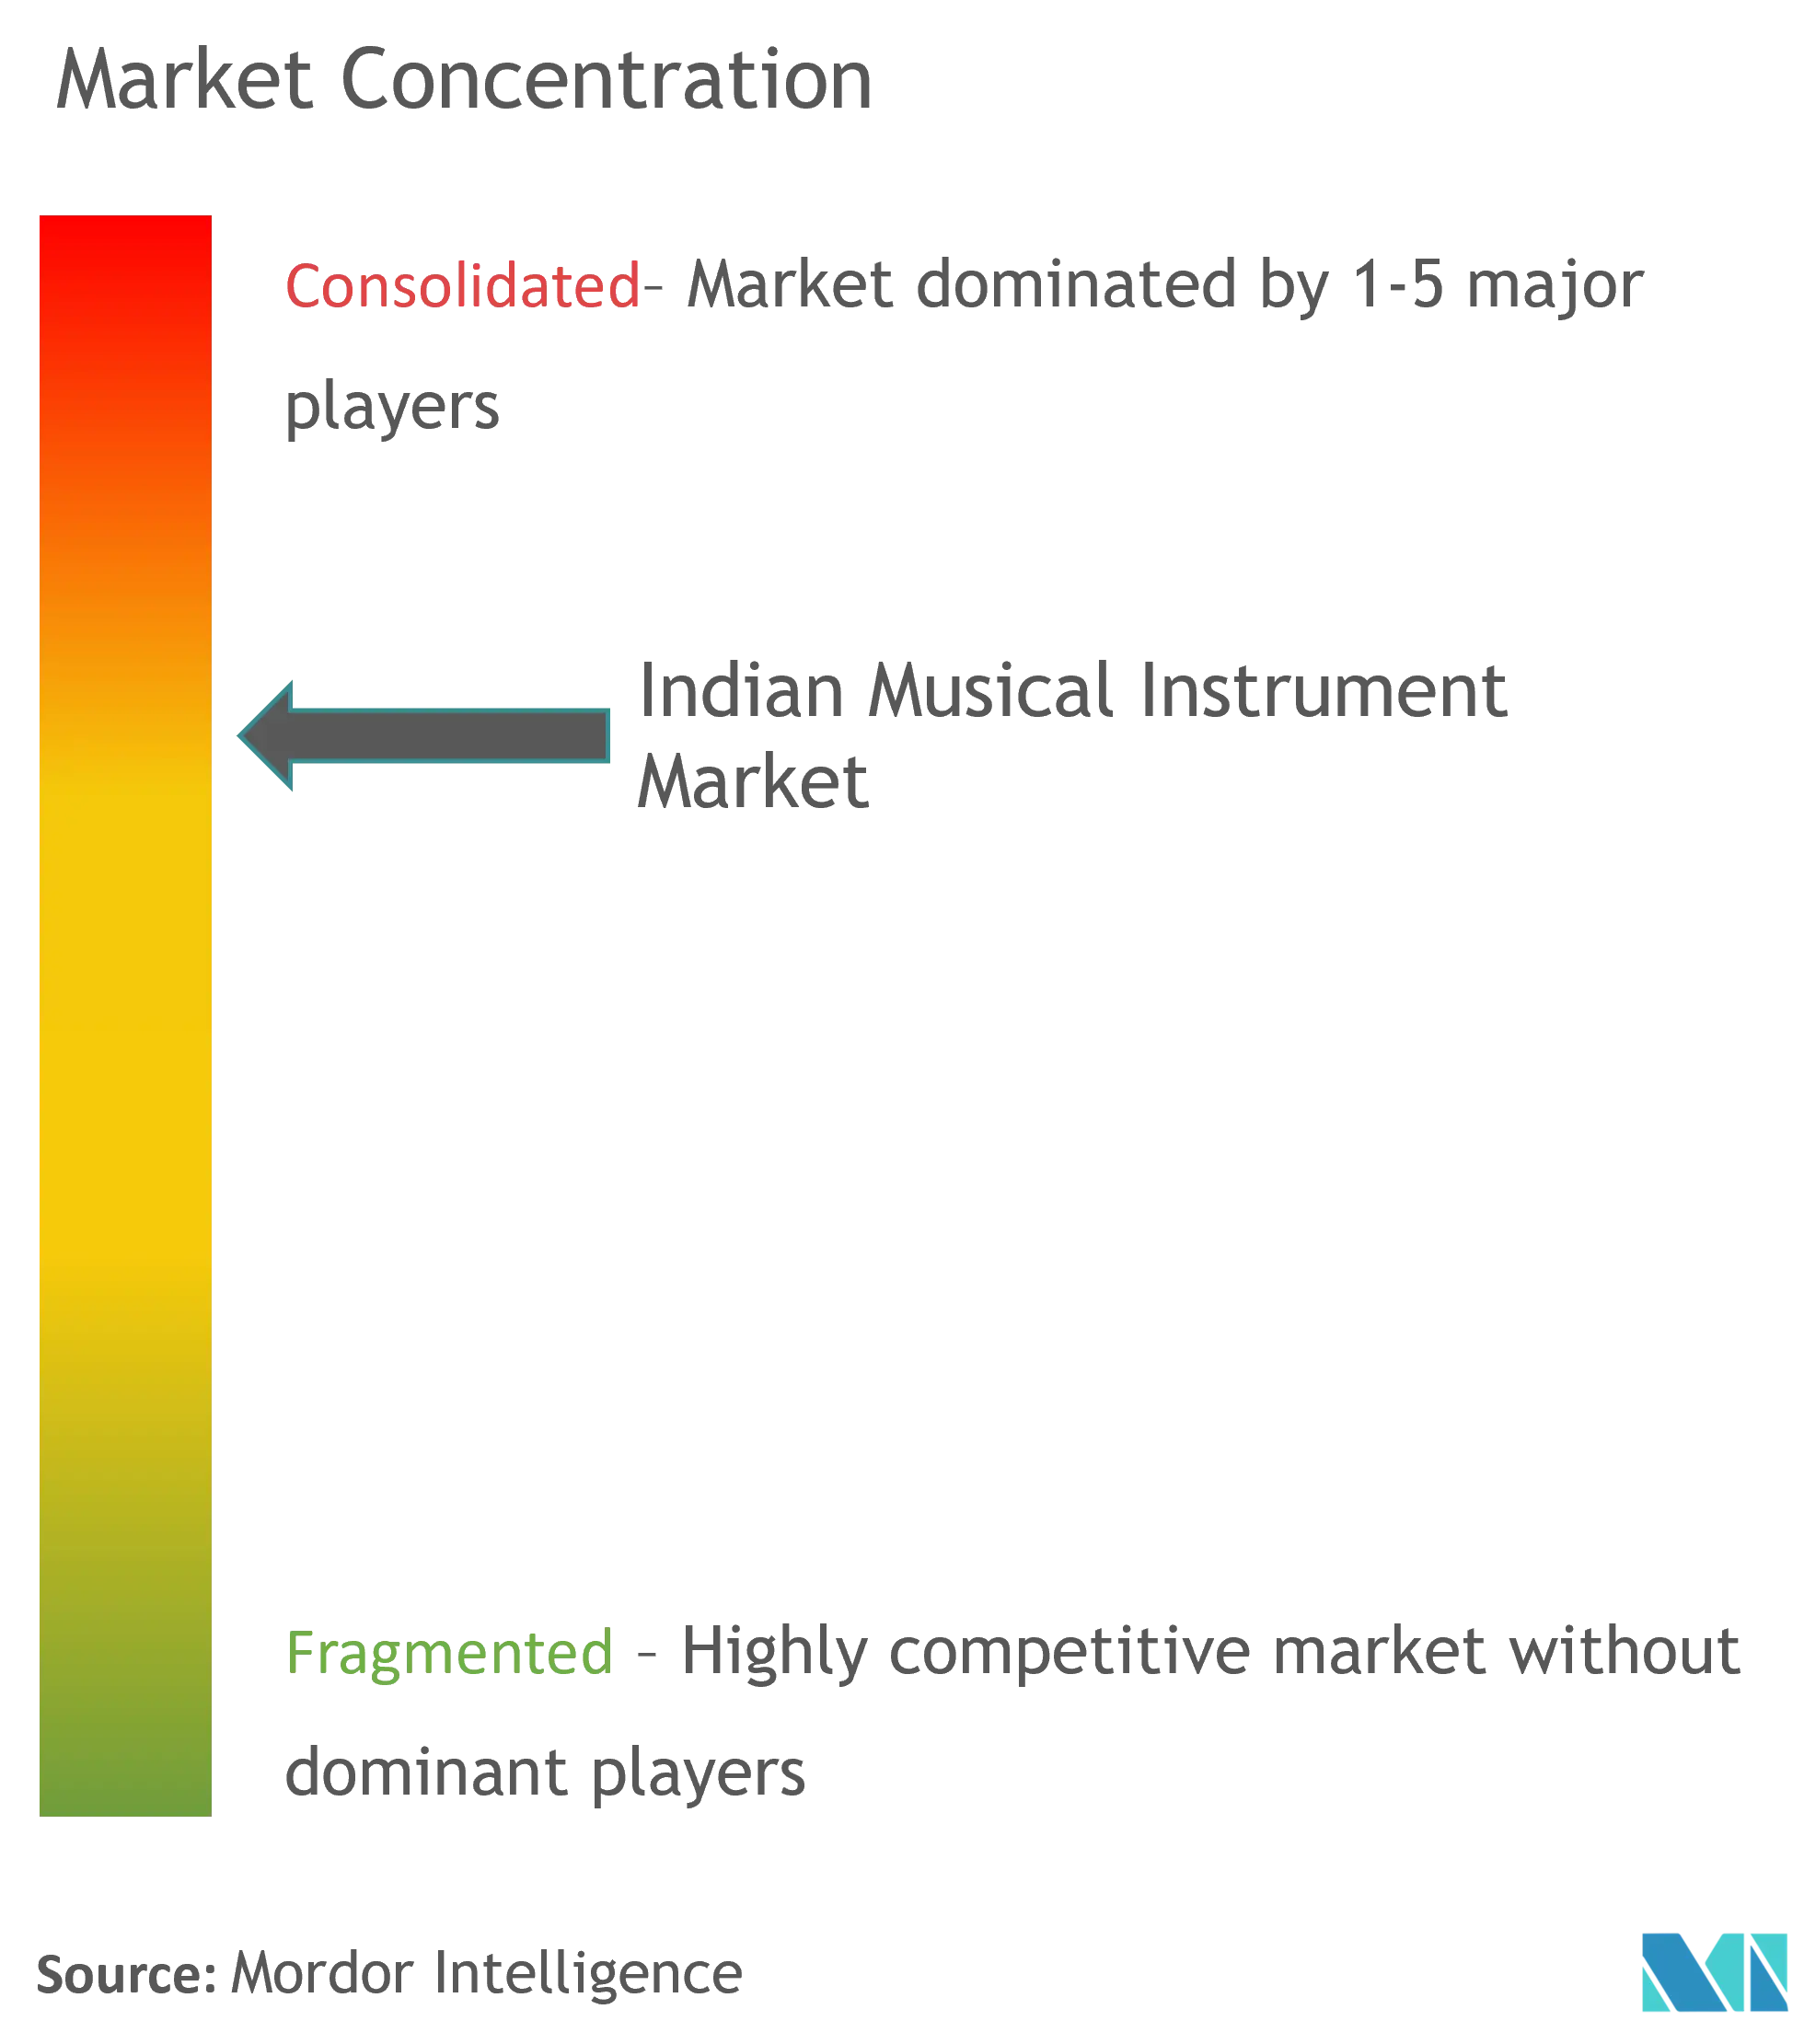 India Musical Instrument Market Concentration